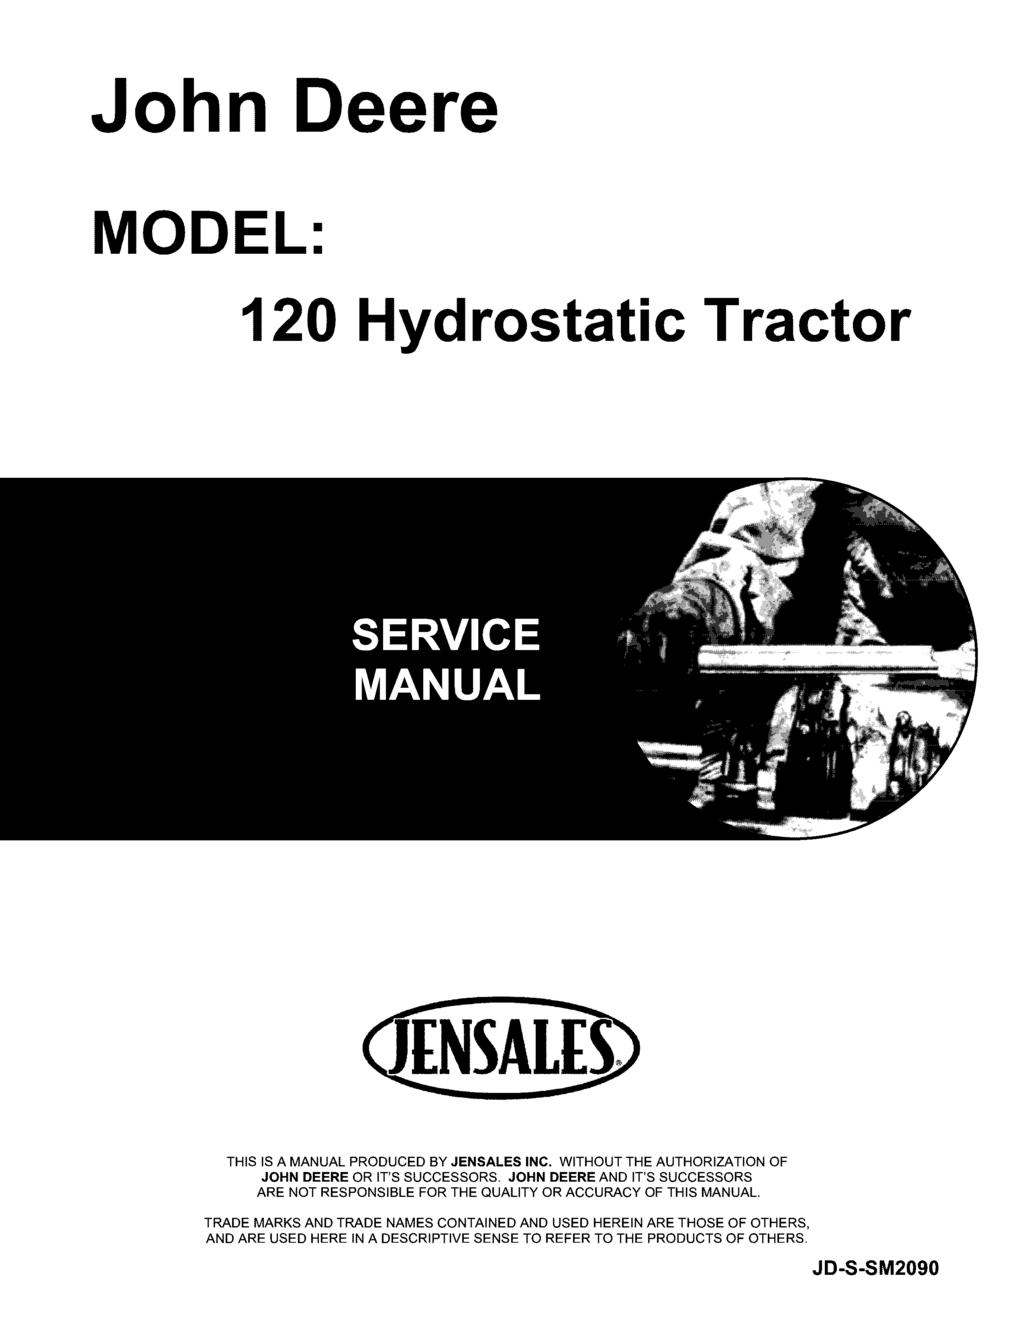 John Deere MODEL: 120 Hydrostatic Tractor THIS IS A MANUAL PRODUCED BY JENSALES INC. WITHOUT THE AUTHORIZATION OF JOHN DEERE OR IT'S SUCCESSORS.